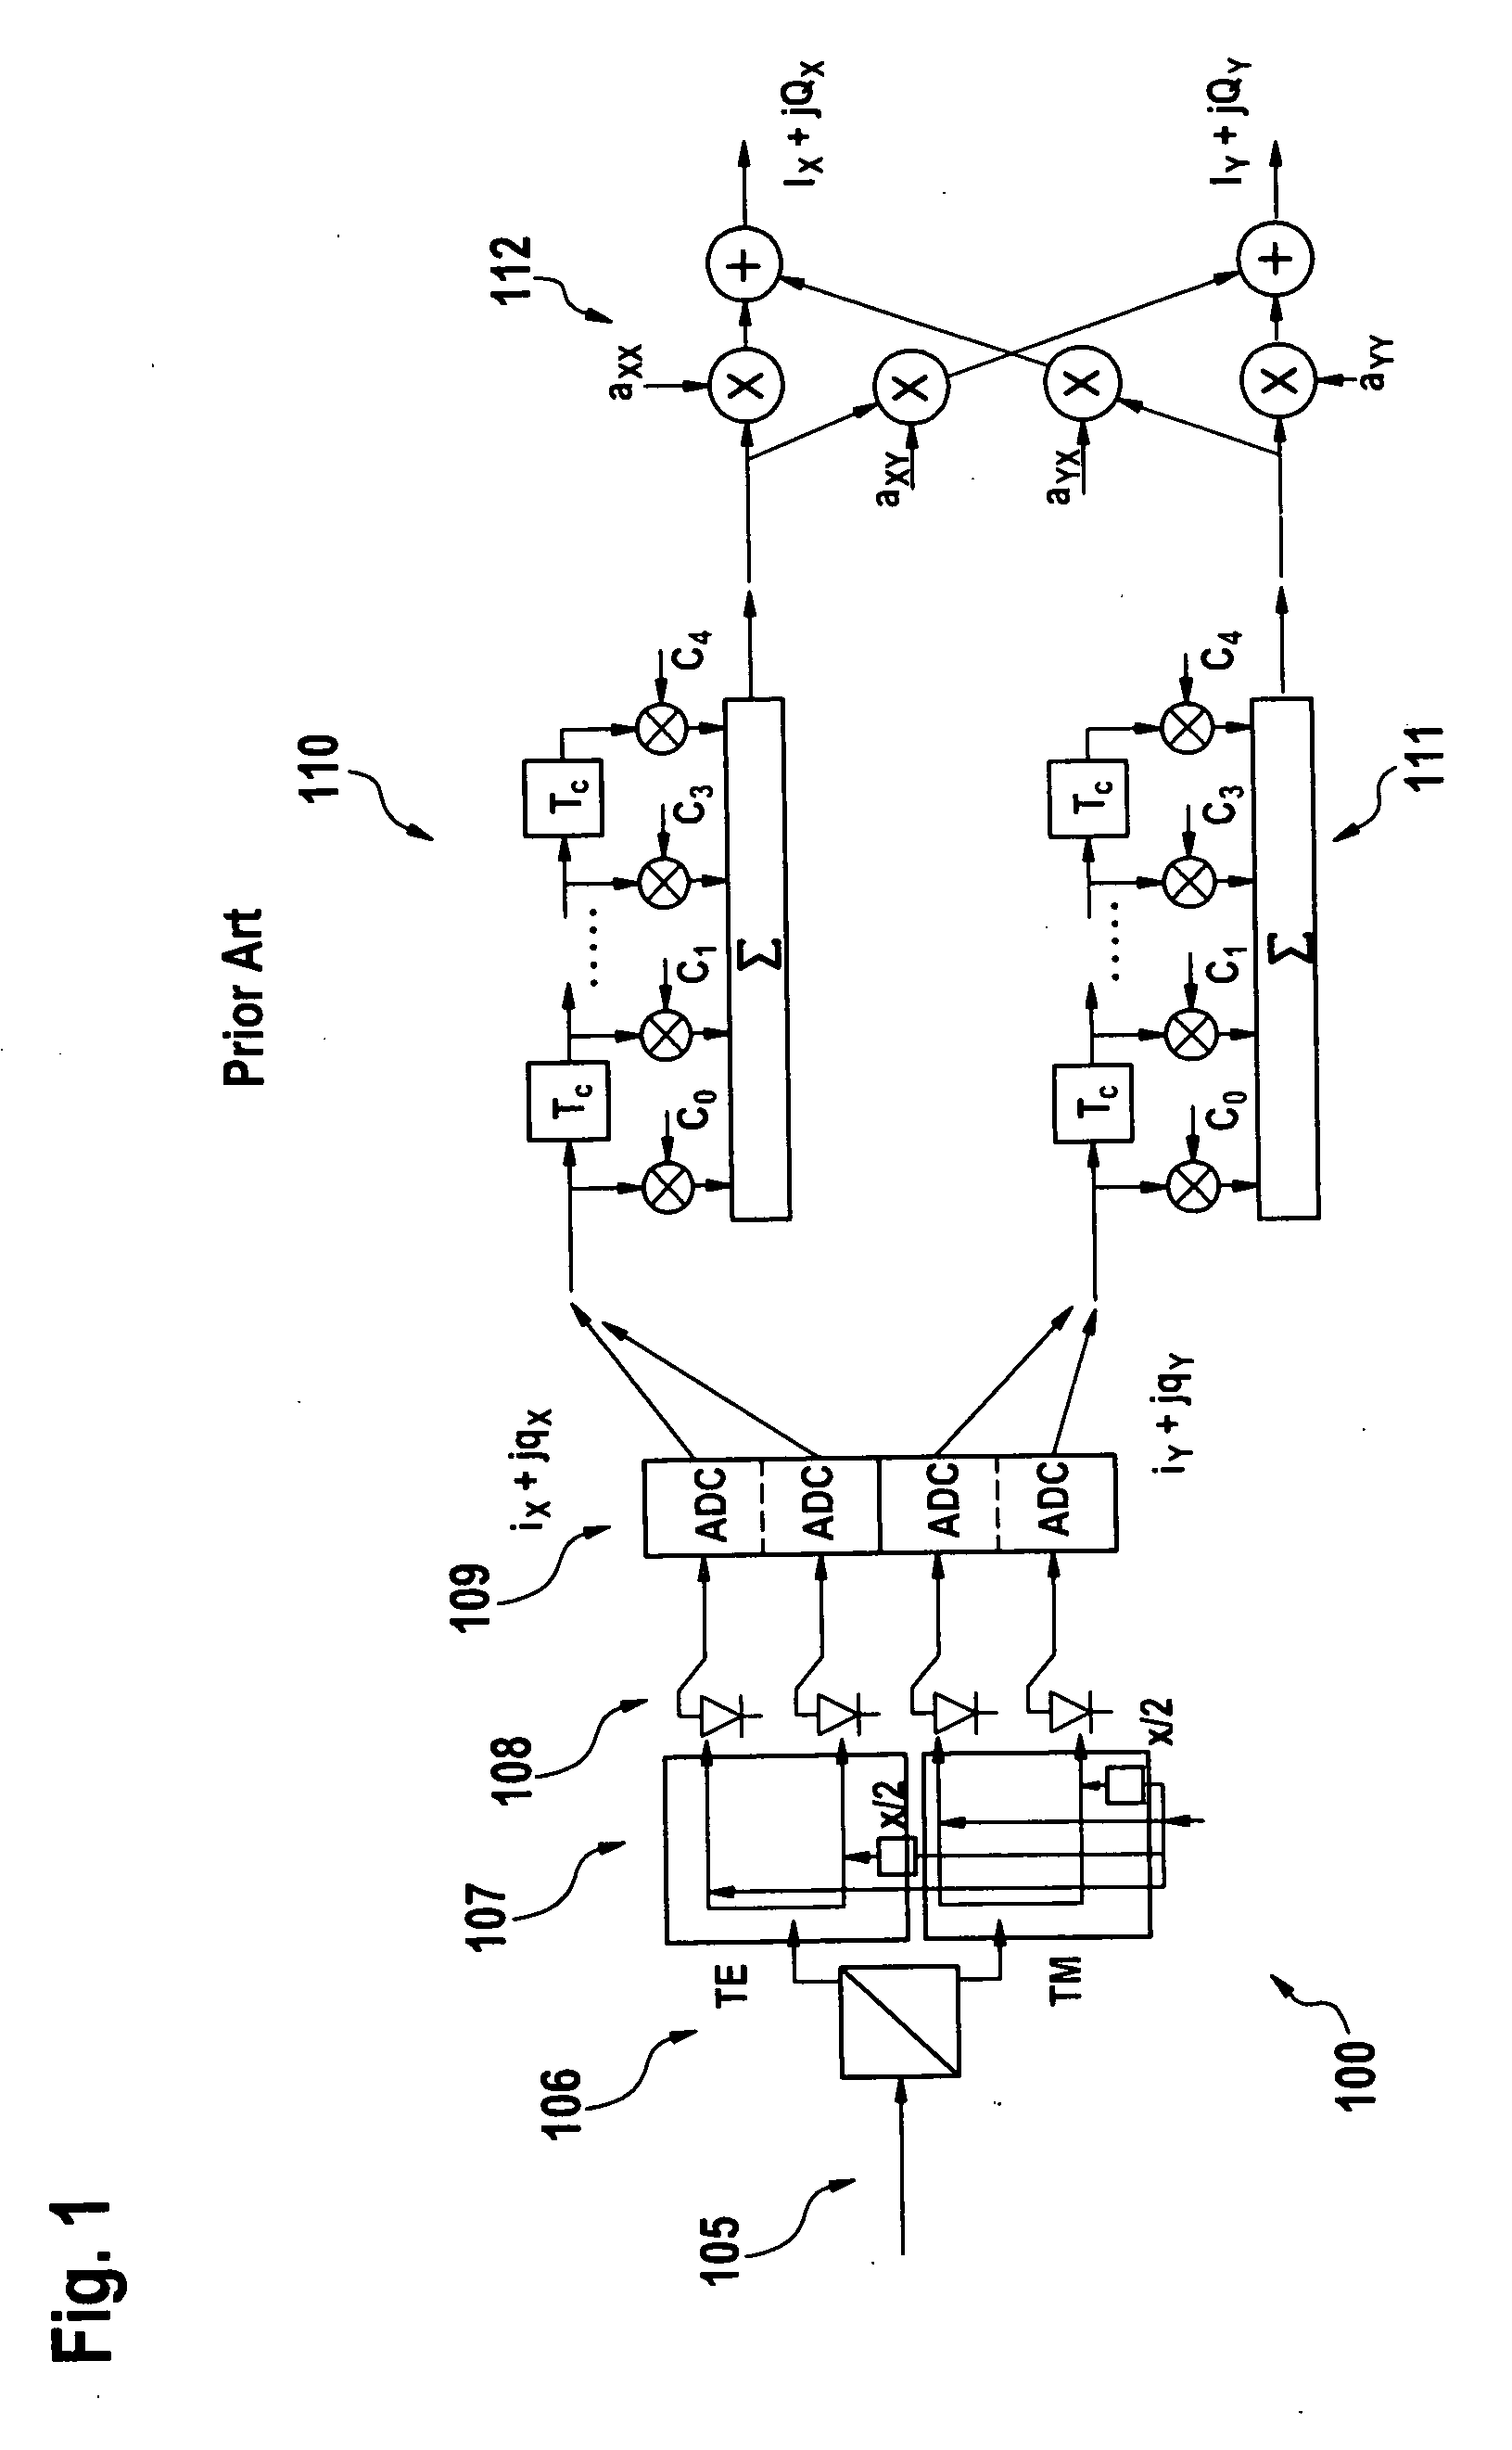 Adaptive non-linearity compensation in coherent receiver